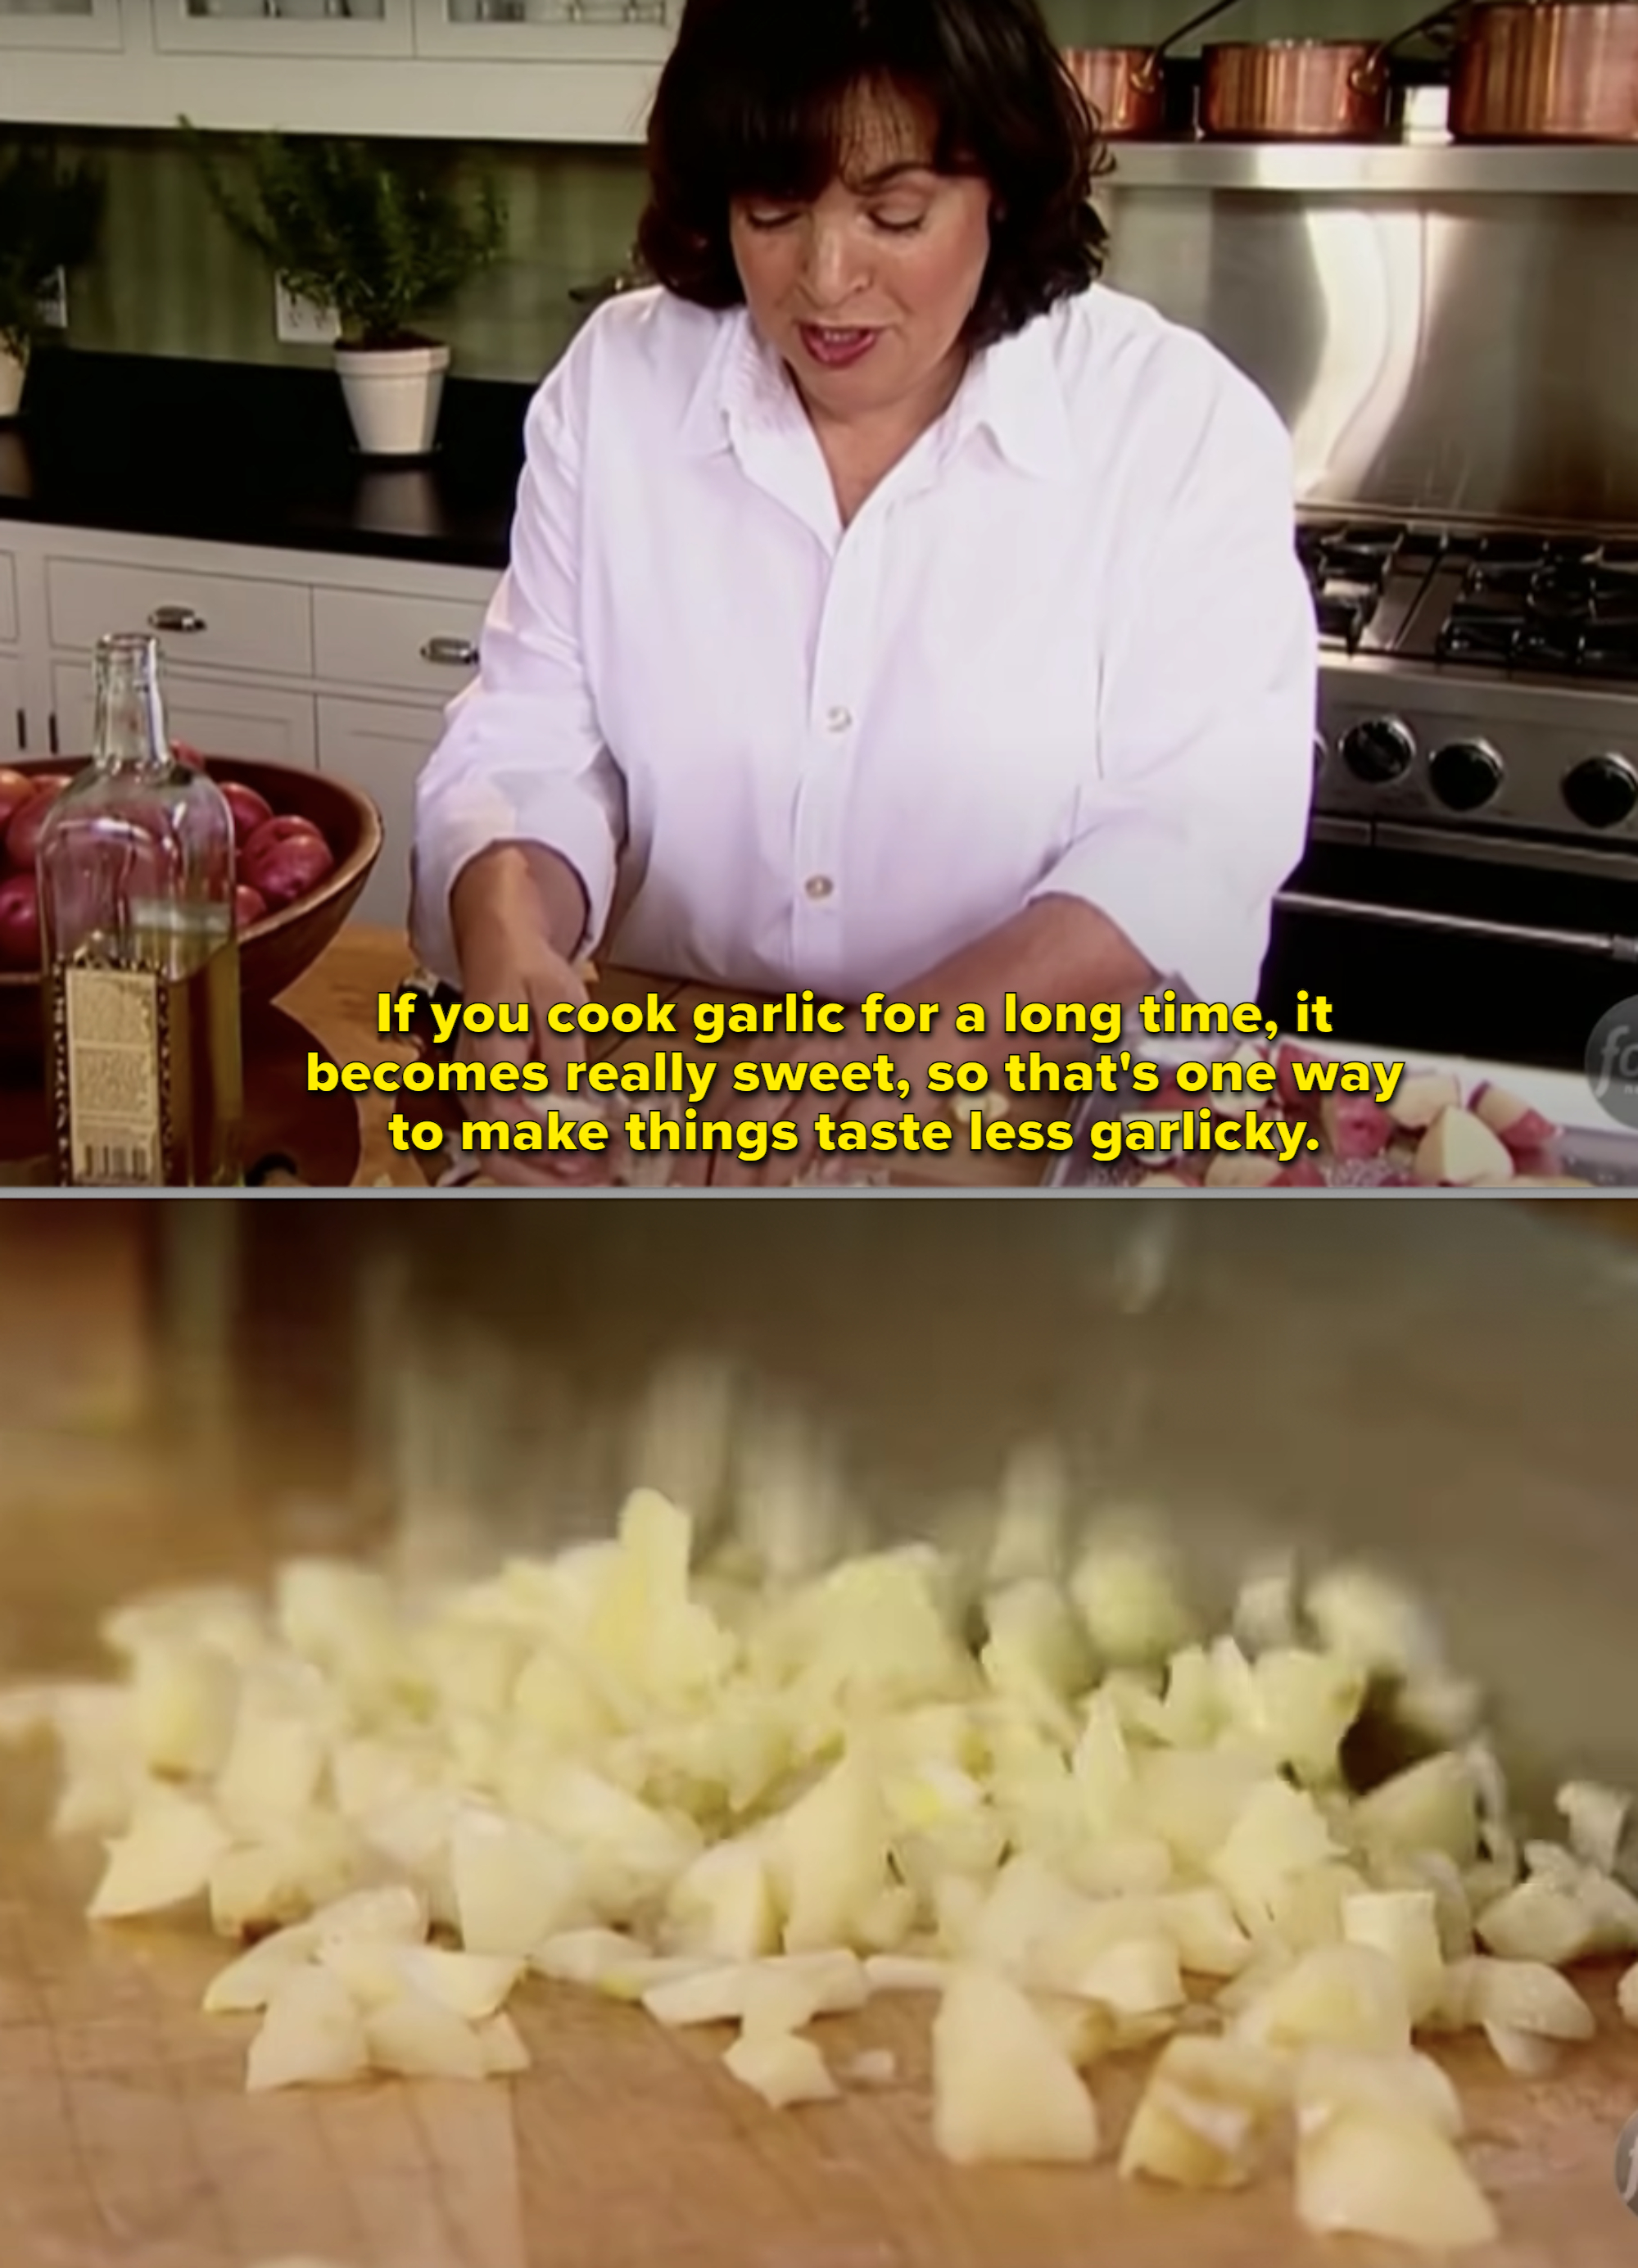 Ina Garten chopping garlic with caption that if you cook garlic for a long time, it becomes sweet